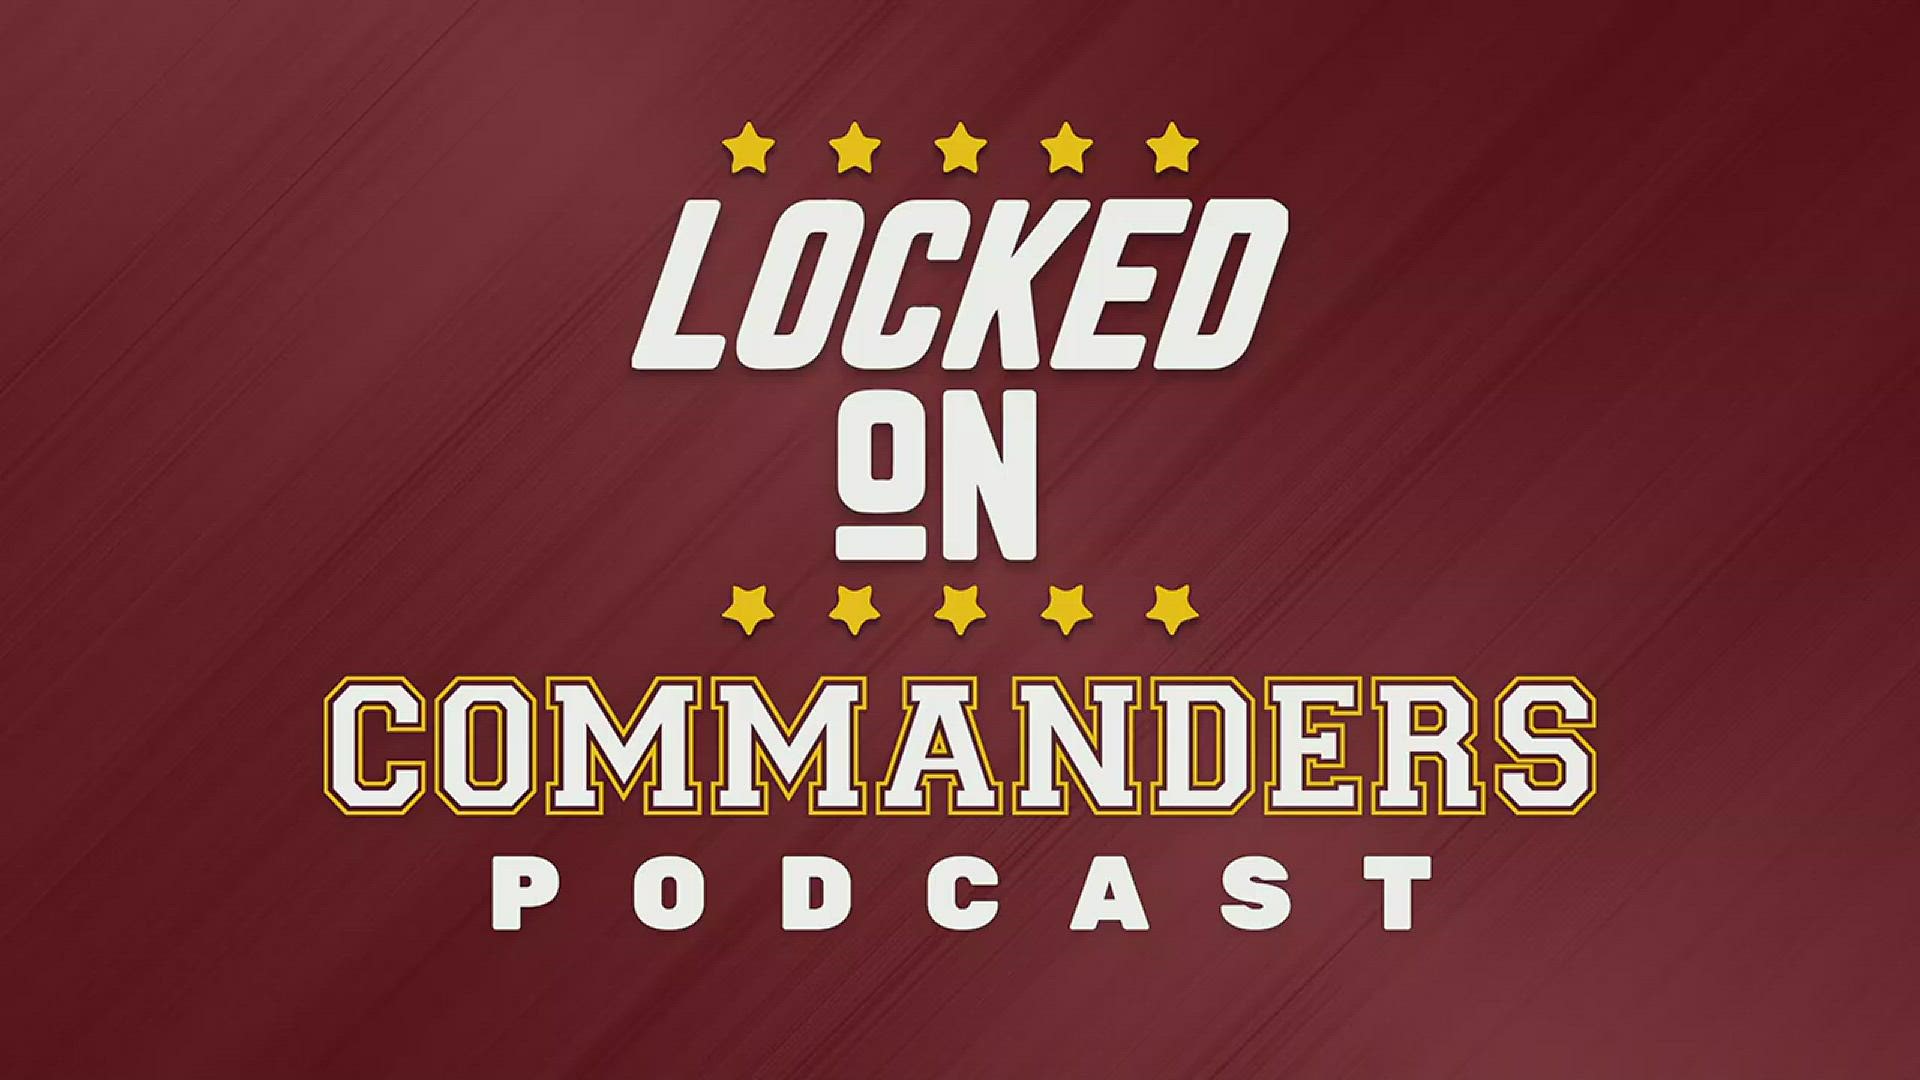 Washington has gone winless in its August preseason games. The Locked On Commanders podcast discusses if it's anything to worry about.